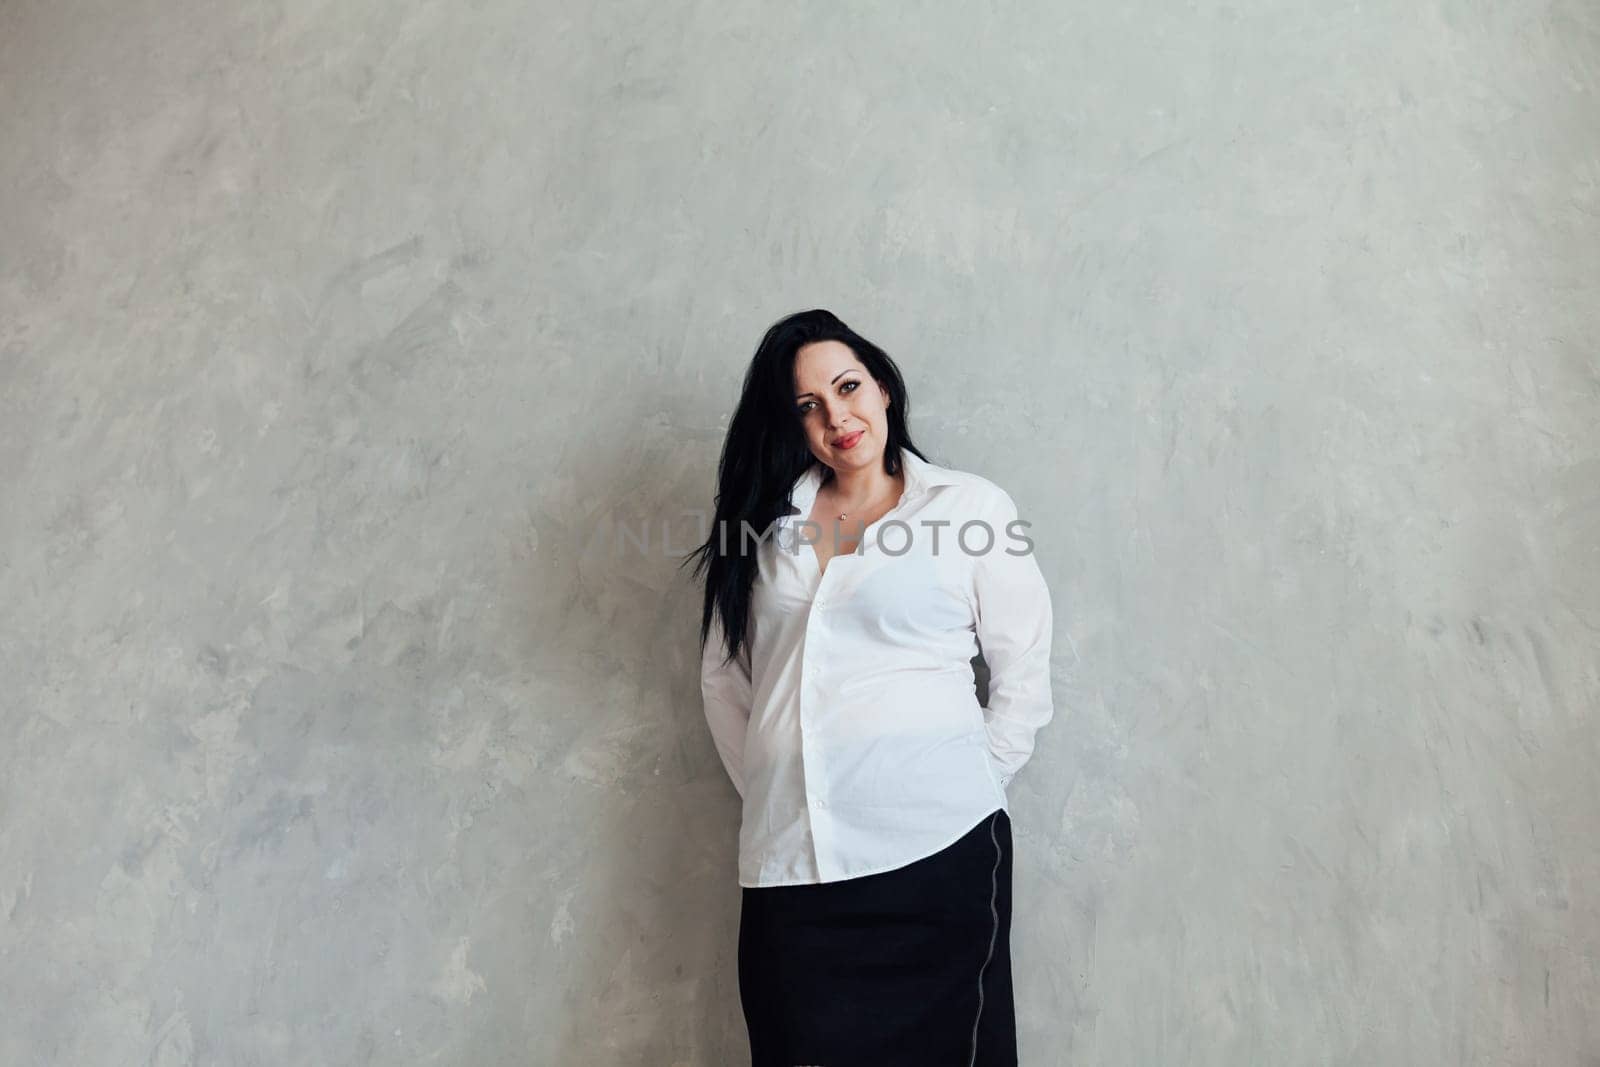 Portrait of a brunette woman in a white business suit